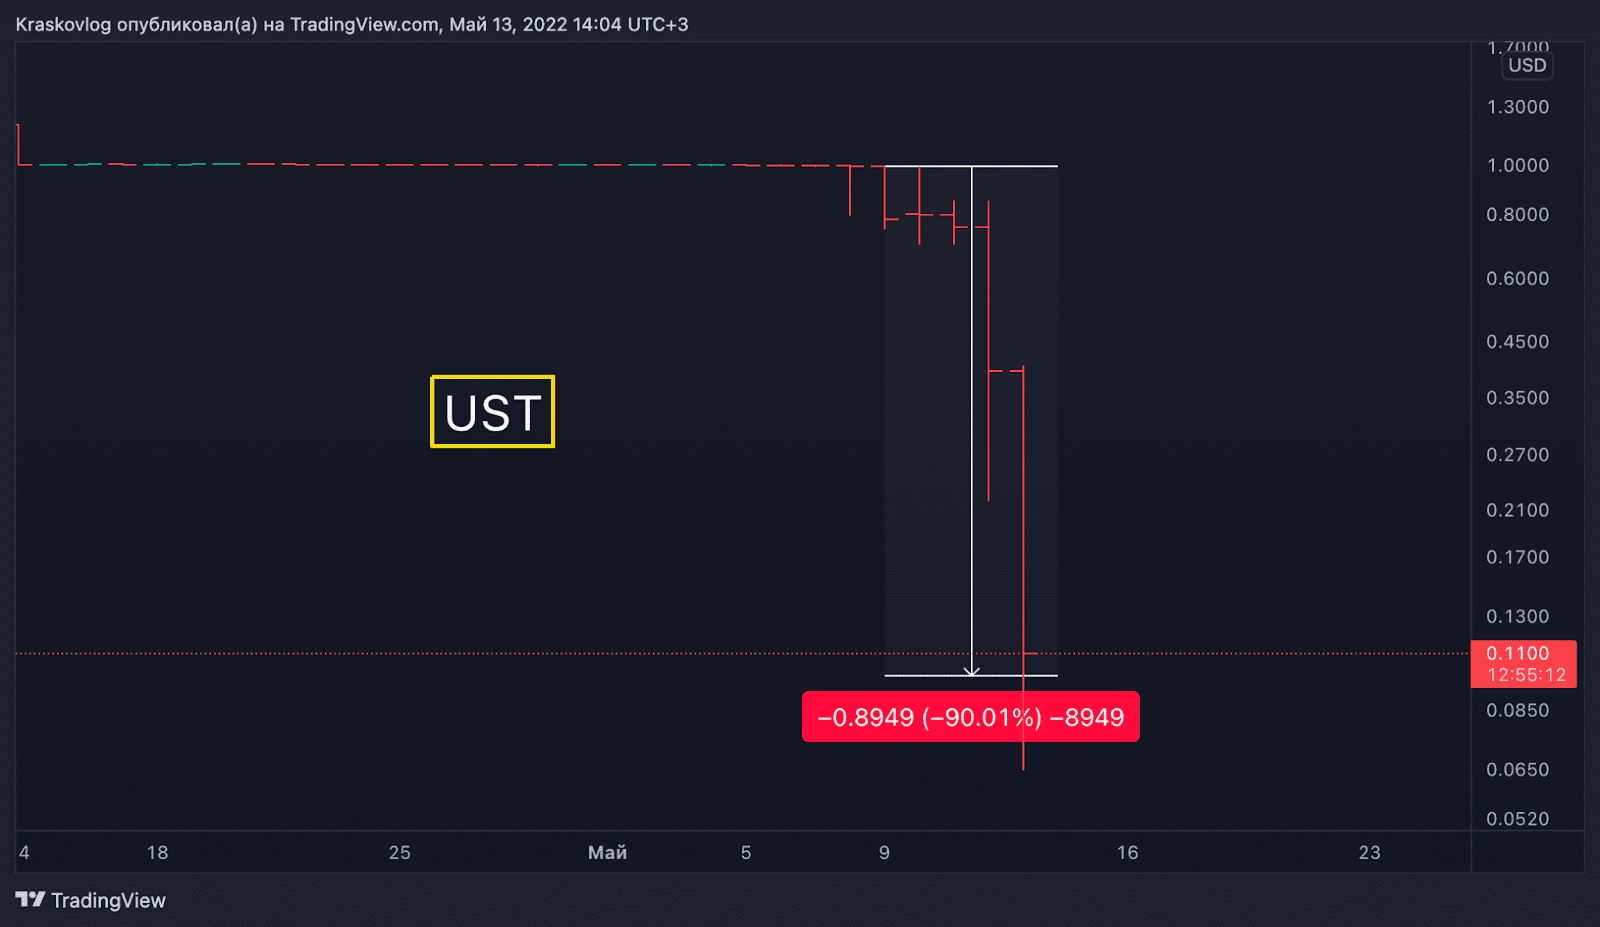 ust stablecoin